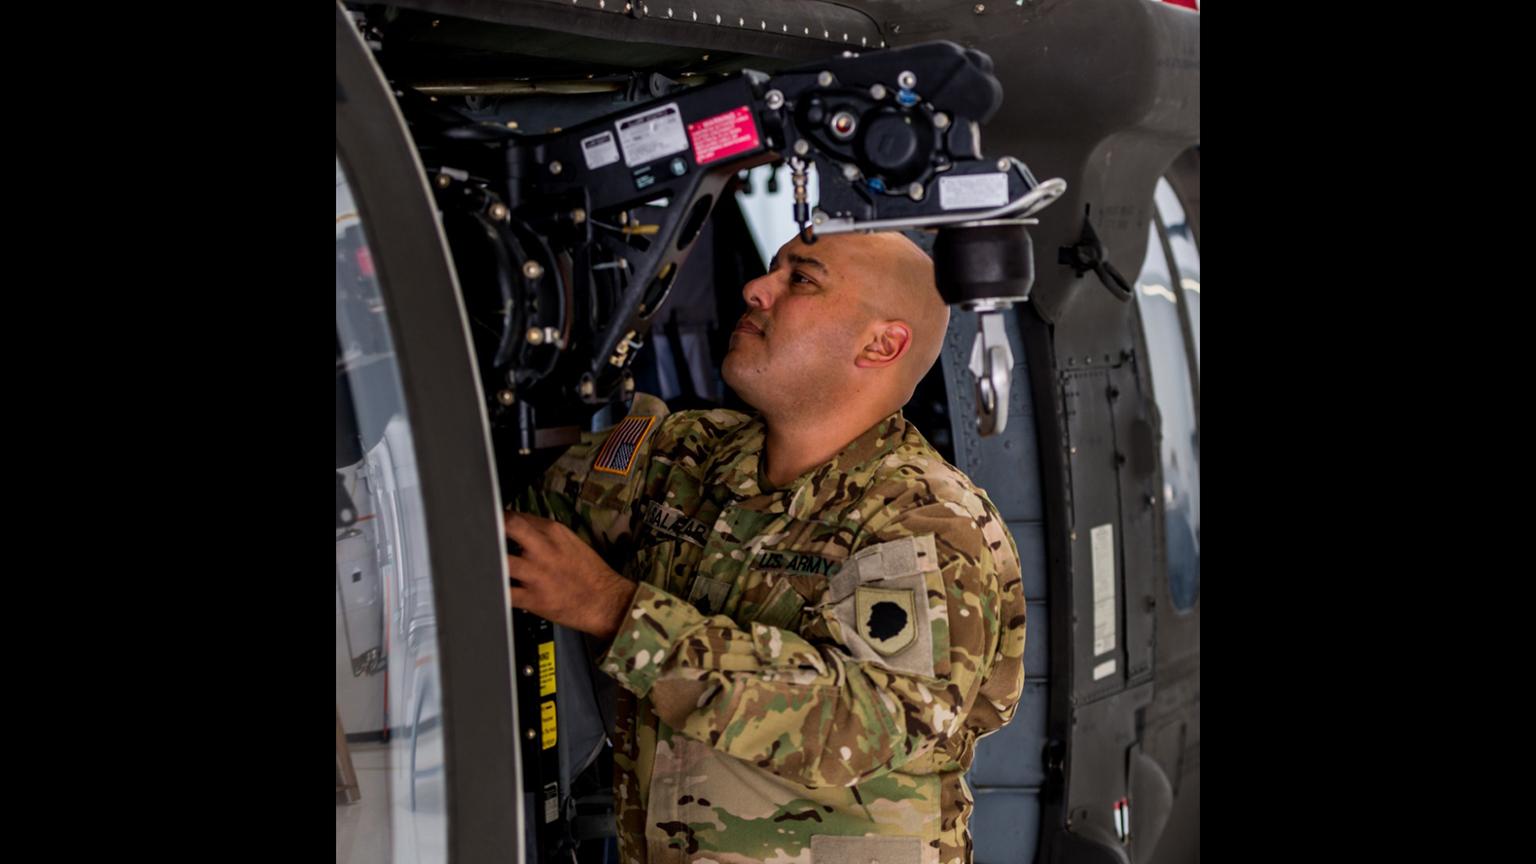 Sgt. Andres Salazar inspects an internal hoist on the UH-60 Blackhawk helicopter at the Kankakee Army Aviation Support Facility on Sept. 12, 2018. (Sgt. Stephen Gifford / Illinois National Guard)